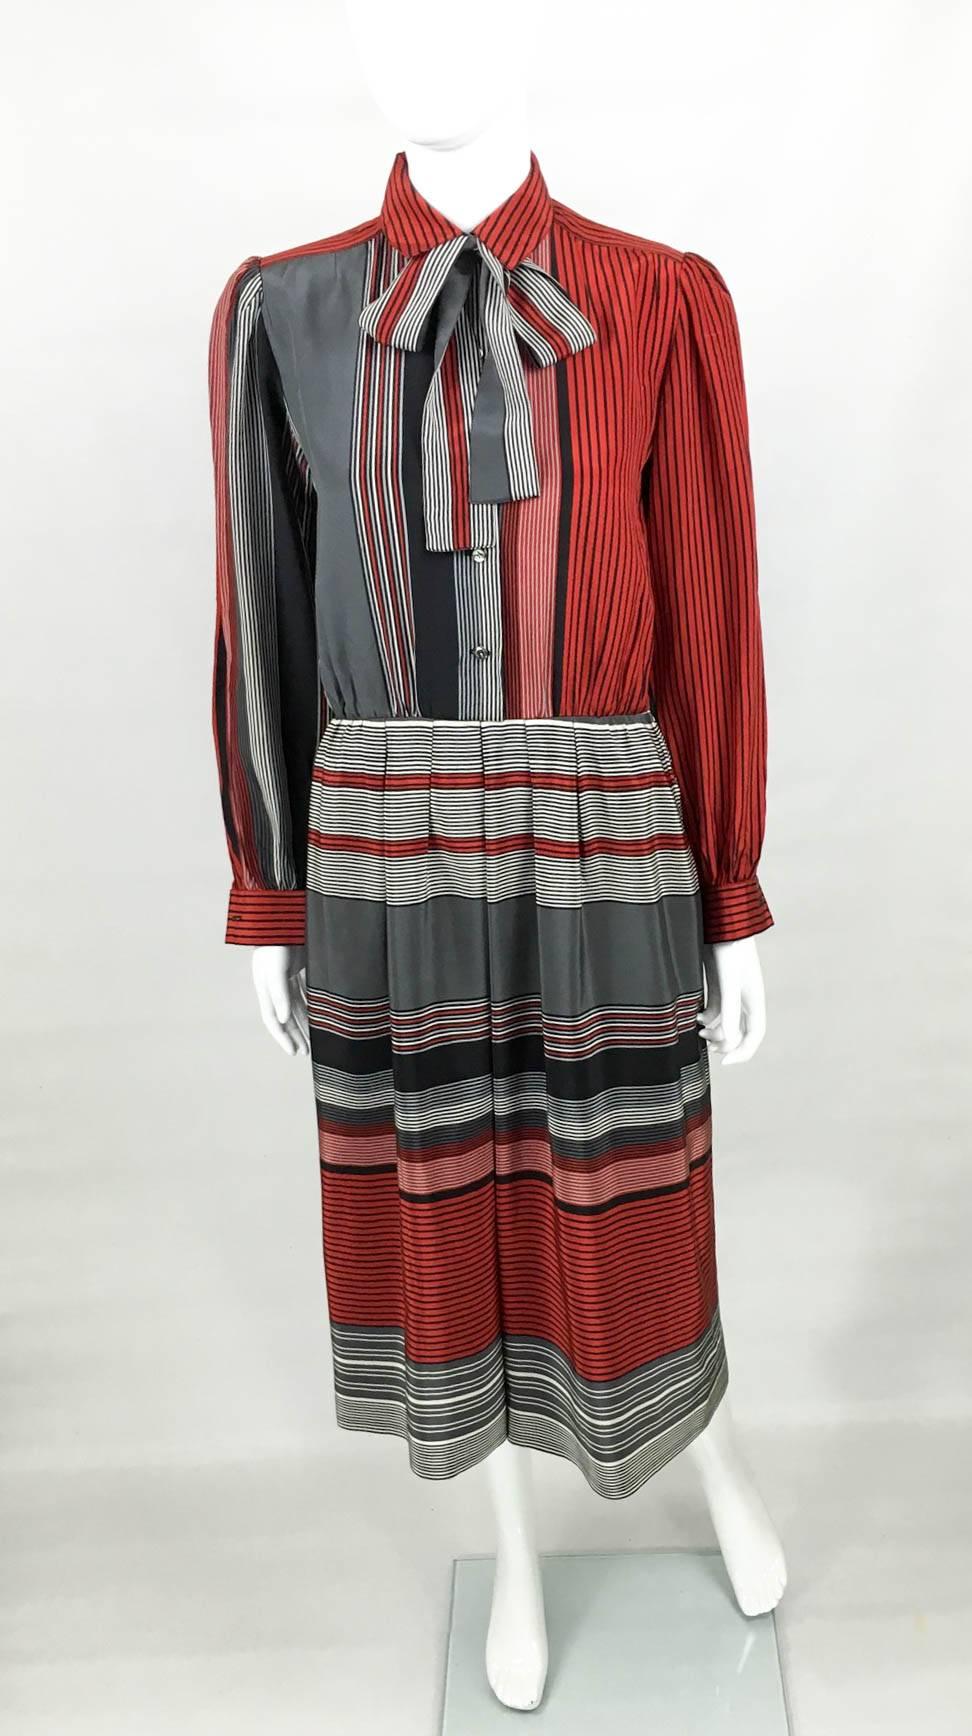 Vintage Balenciaga Silk Stripy Dress. This gorgeous silk dress by Balenciaga features stripes in red, grey, black and white. The top part of the dress has vertical stripes and the long sleeves, collar and buttons resemble a shirt. It comes with an